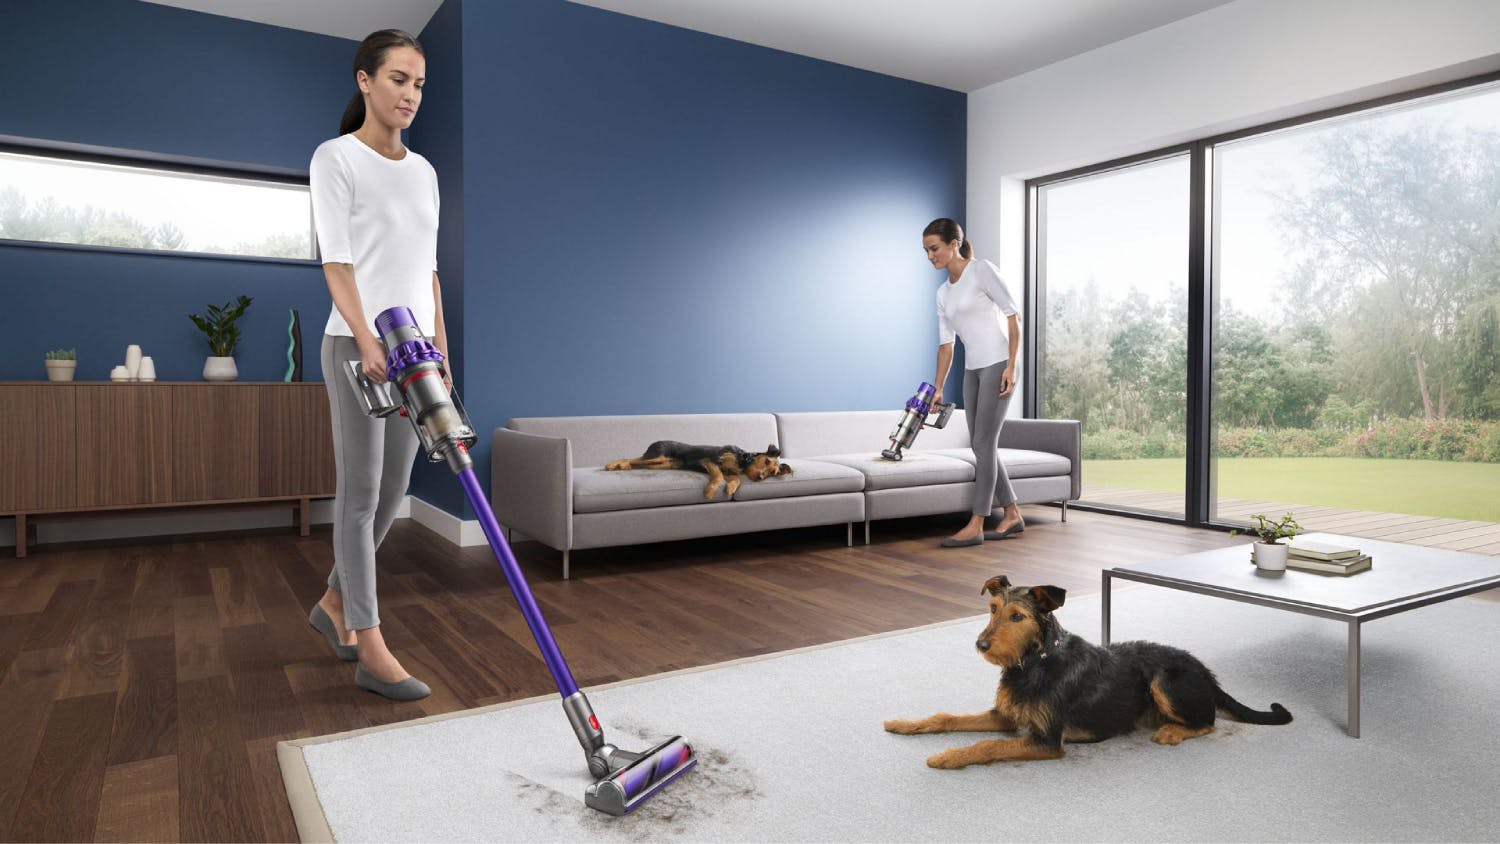 Dyson Cyclone V10 Handstick Vacuum Cleaner